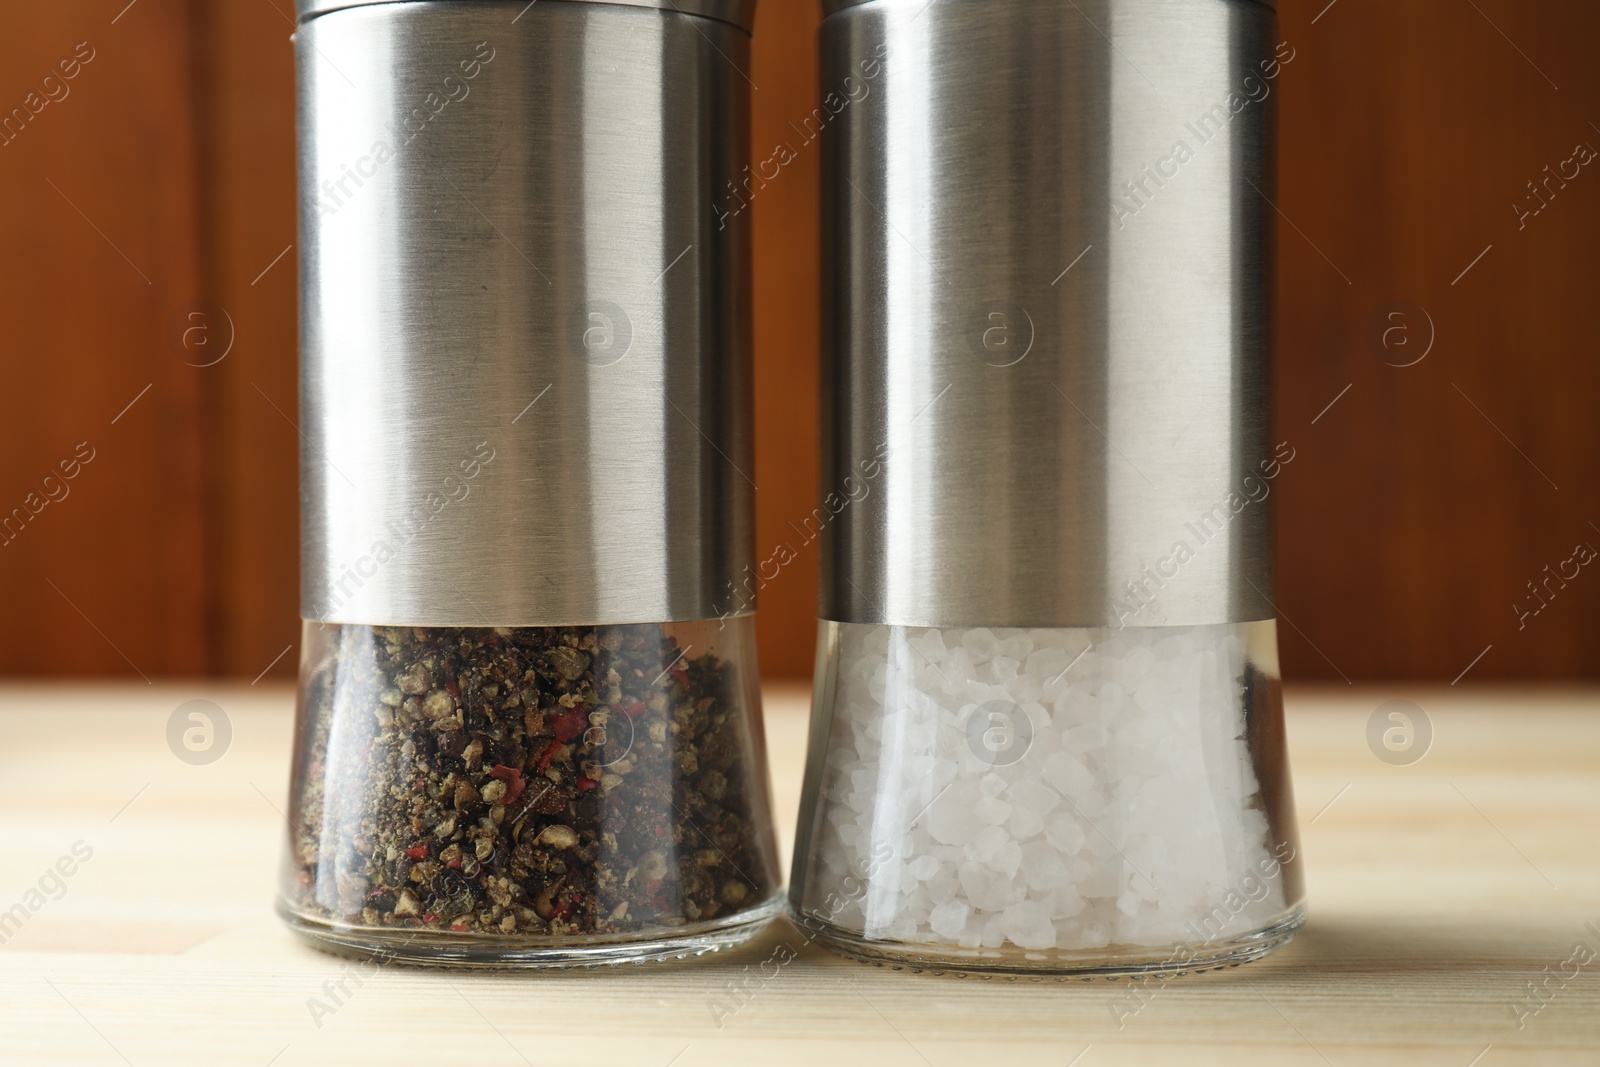 Photo of Salt and pepper shakers on light wooden table, closeup